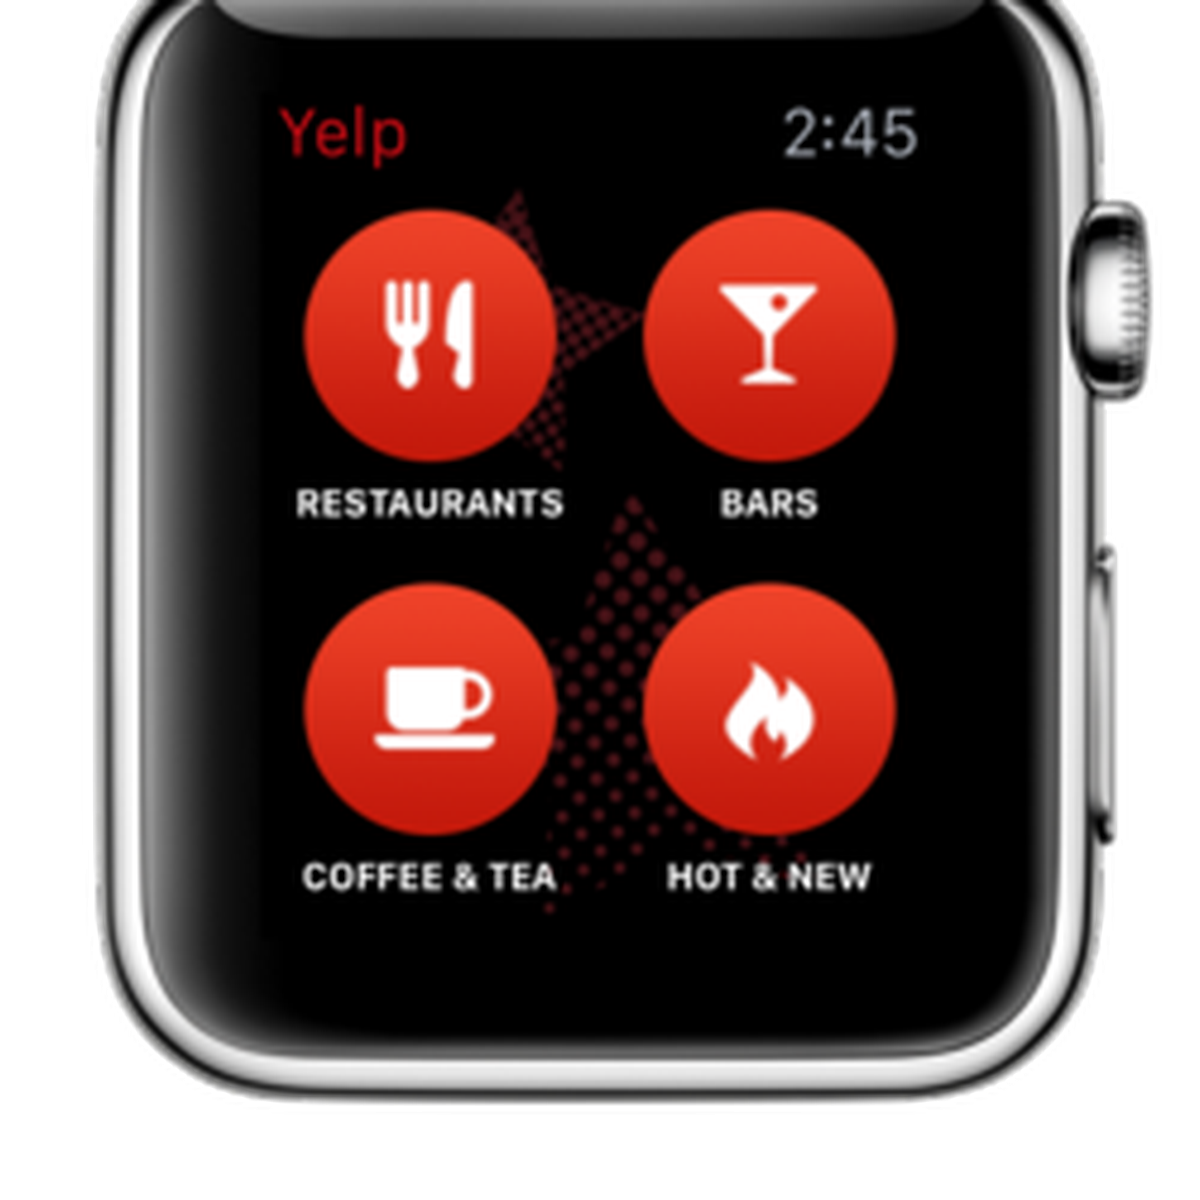 Yelp Releases Apple Watch App With Nearby Location Listings, Reviews - MacRumors